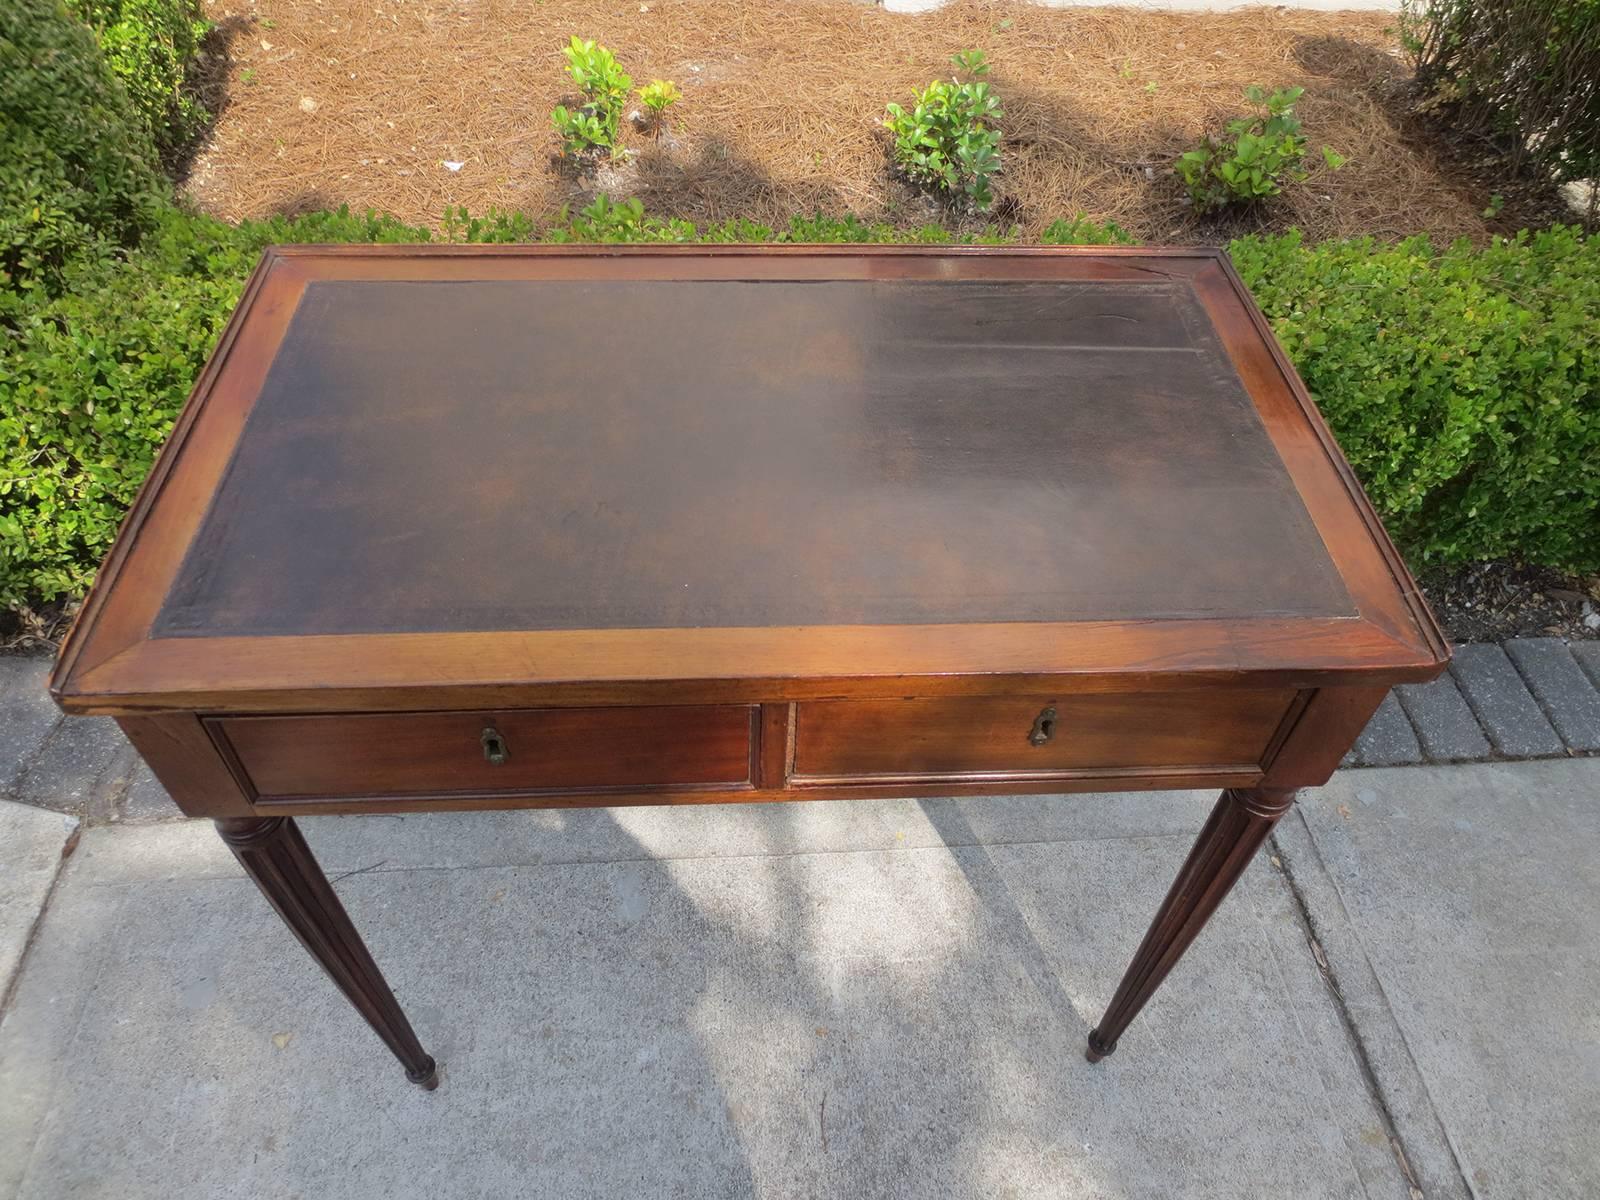 18th-19th century French writing table with leather top.